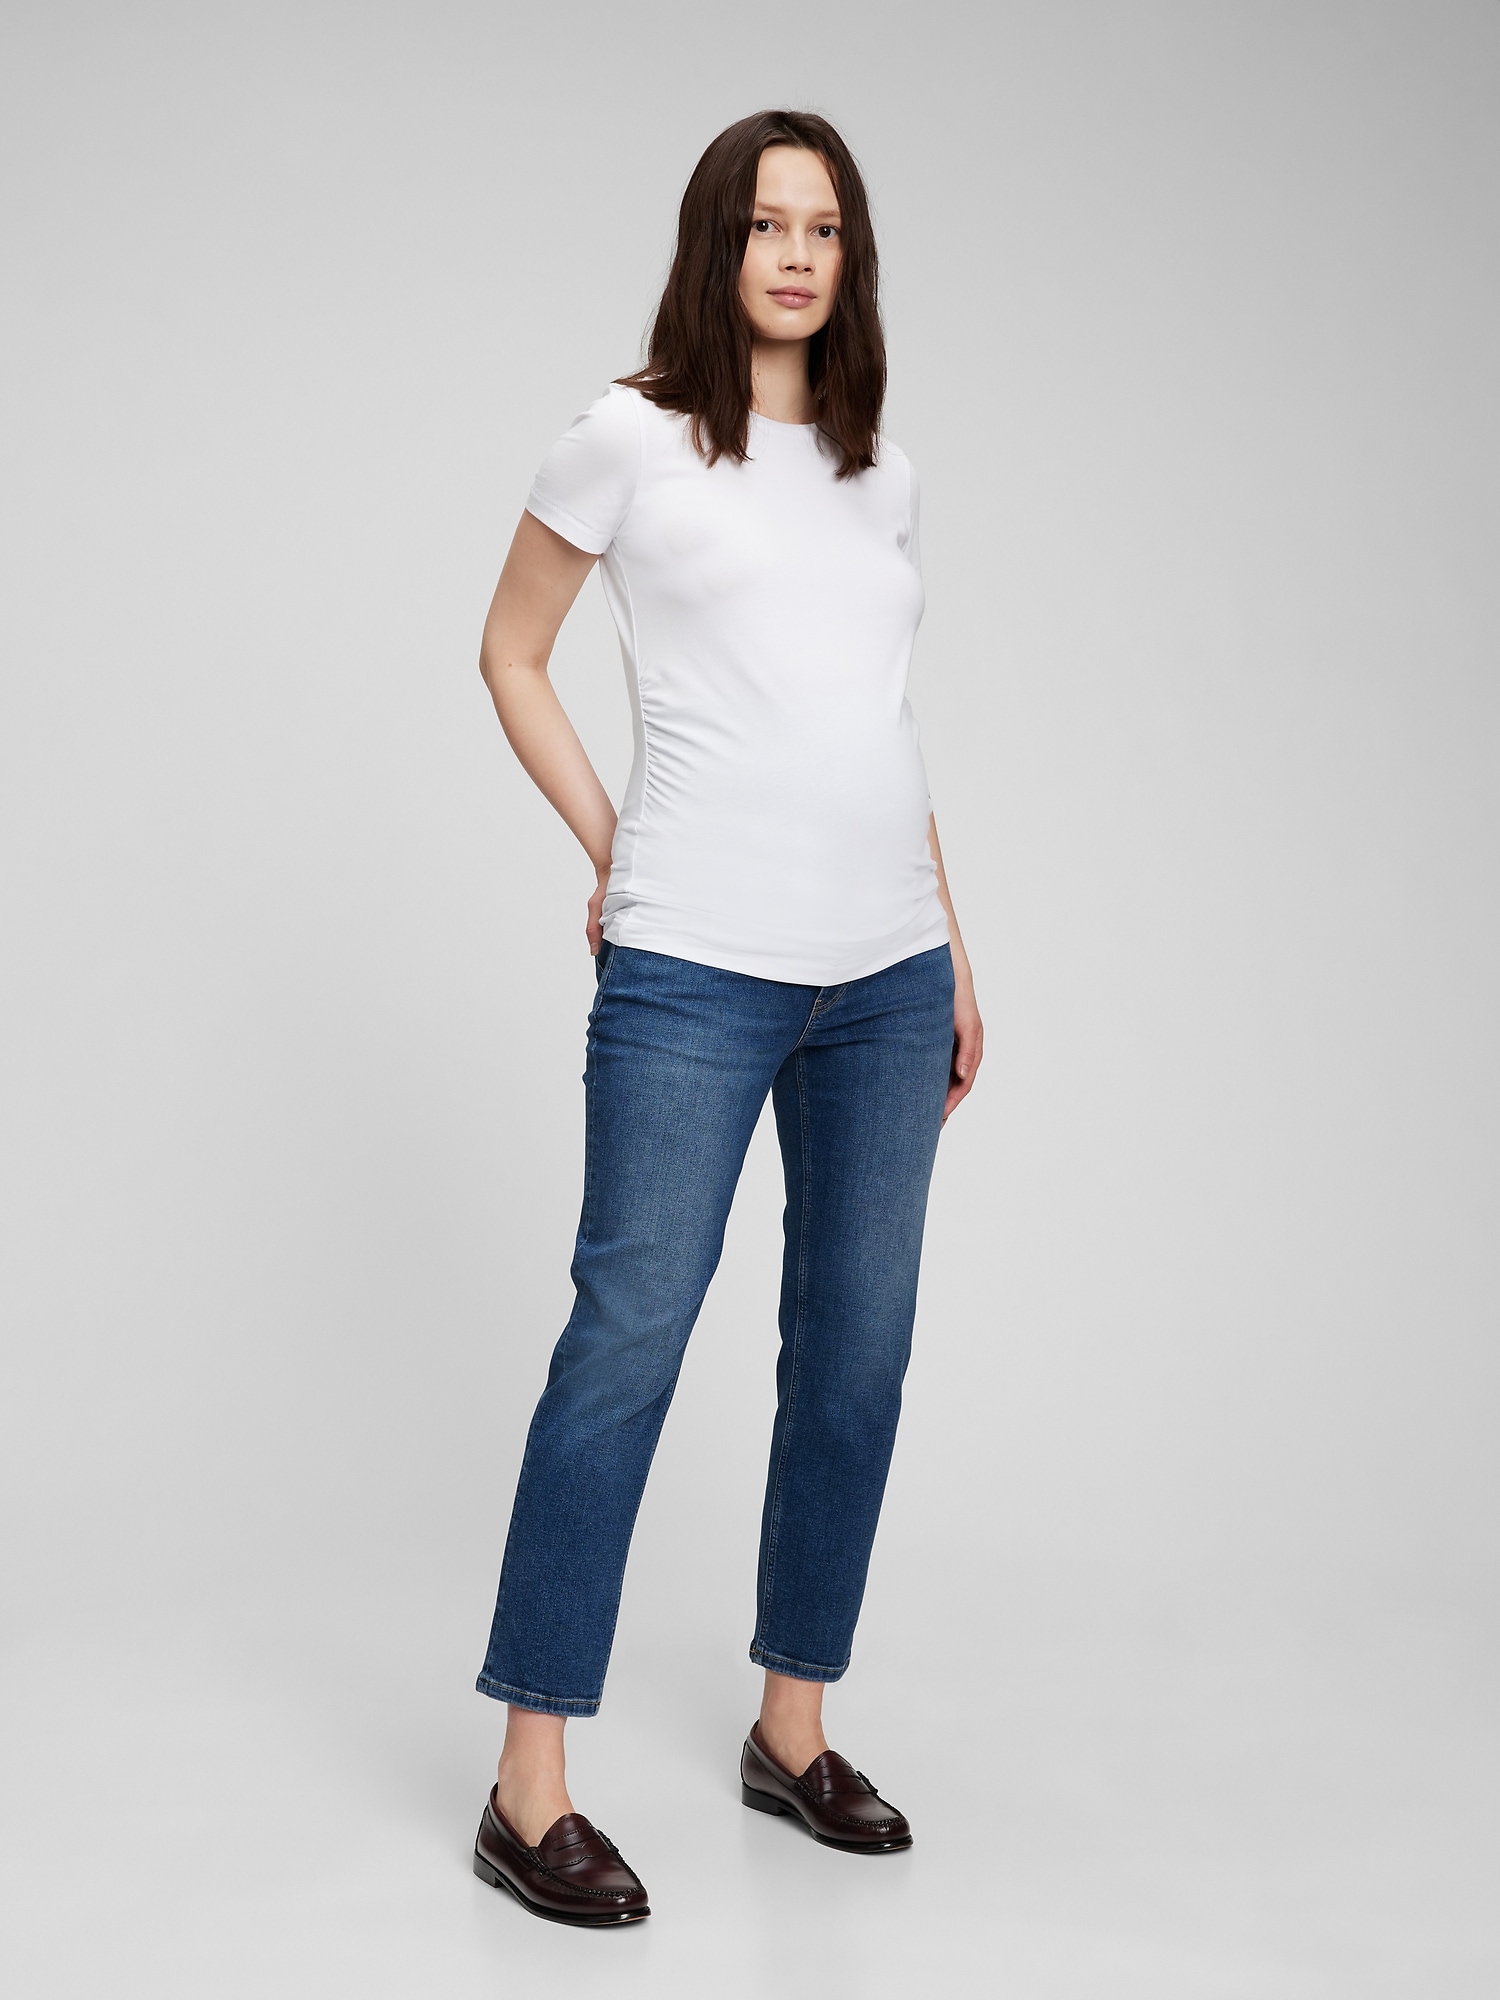 Women's Fall Clothes Pregnancy Pants Over Jeans Maternity The